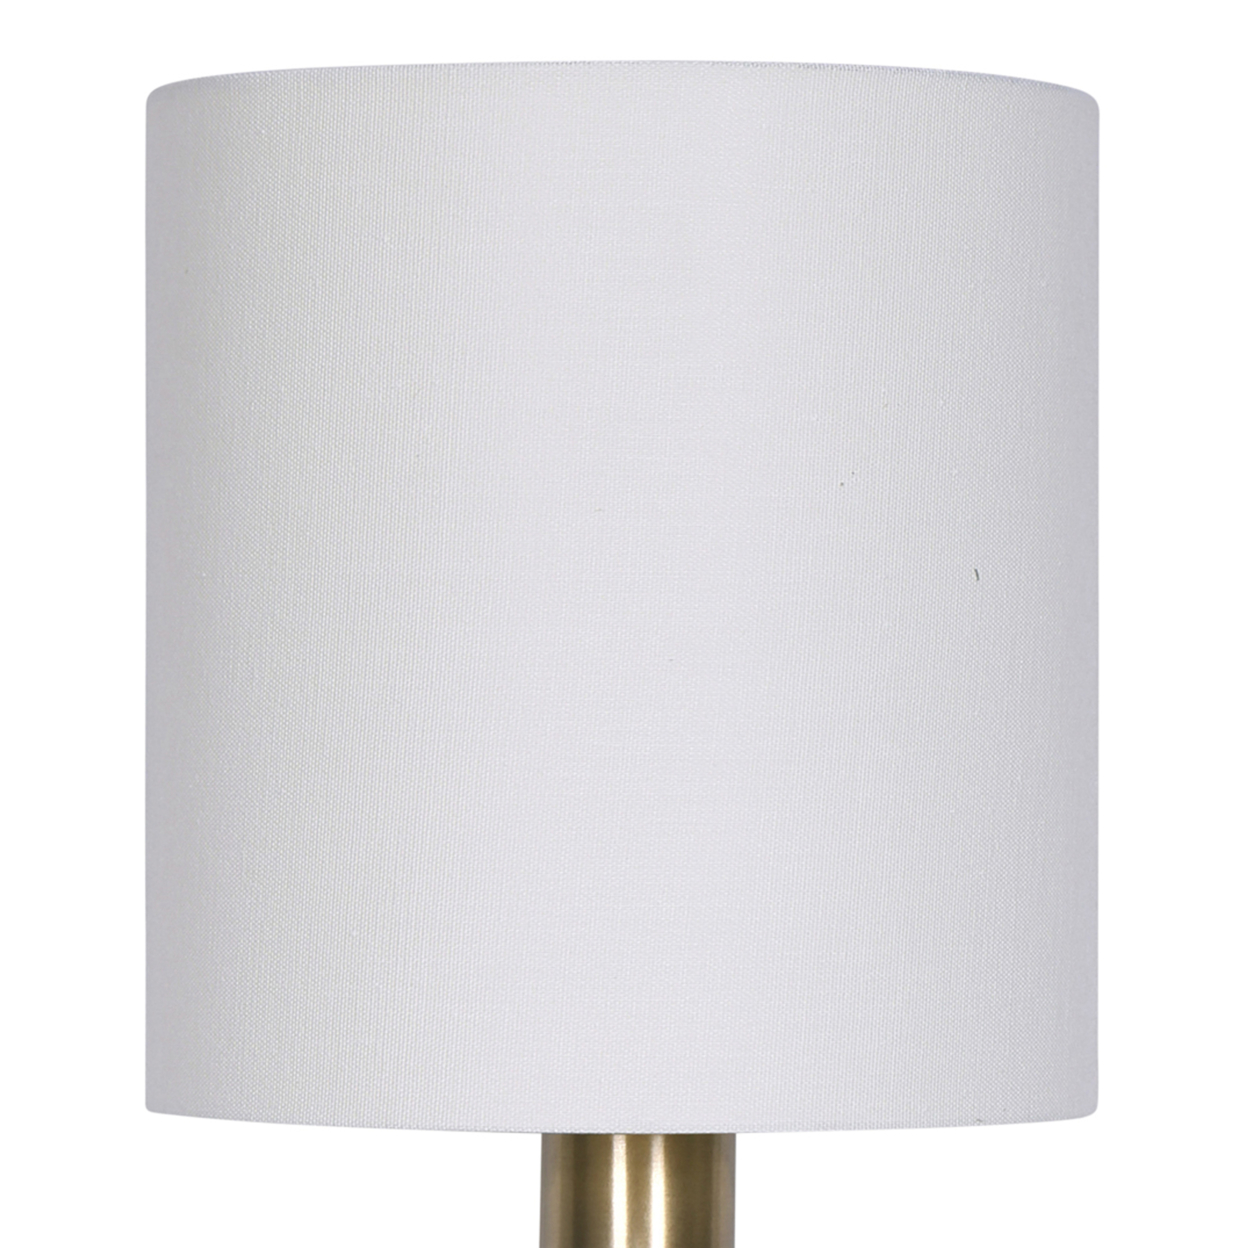 24 Inch Set Of 2 Modern Table Lamps With Polyester Shade, Bronze Metal Base- Saltoro Sherpi